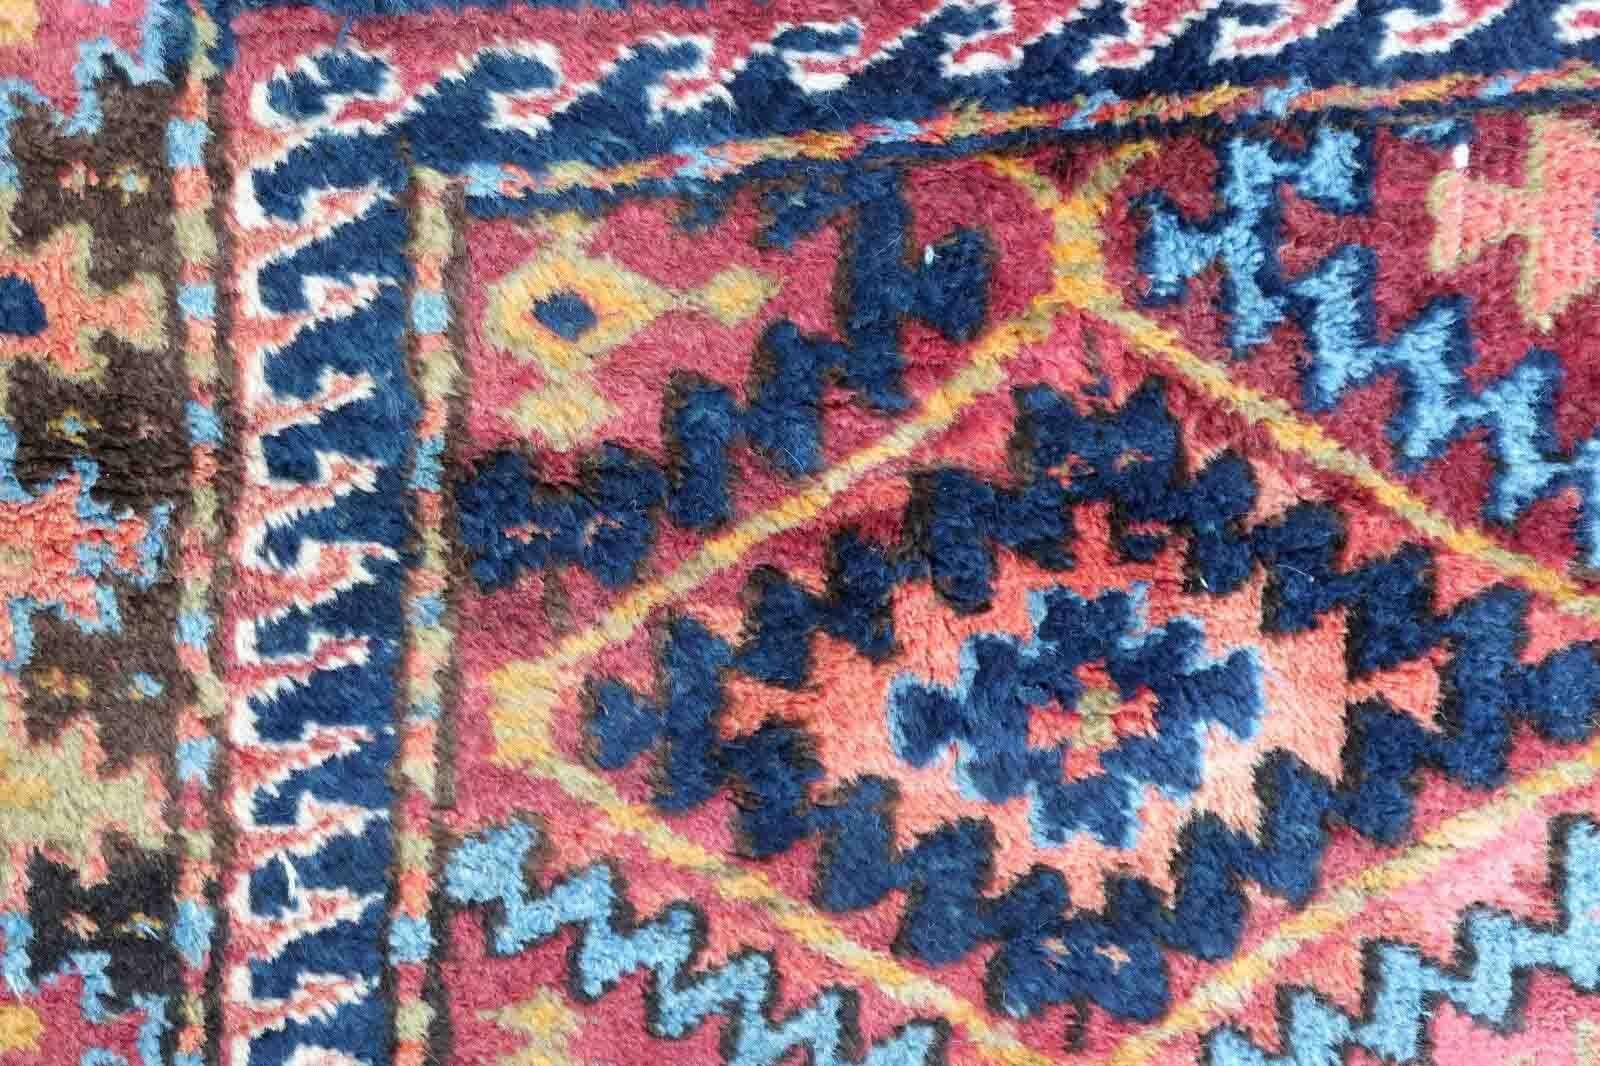 Handmade antique rug from Middle East in Kurdish design. The rug is in colorful repeating pattern and all-over design. It is from the beginning of 20th century in original good condition.

-condition: original good,

-circa: 1920s,

-size: